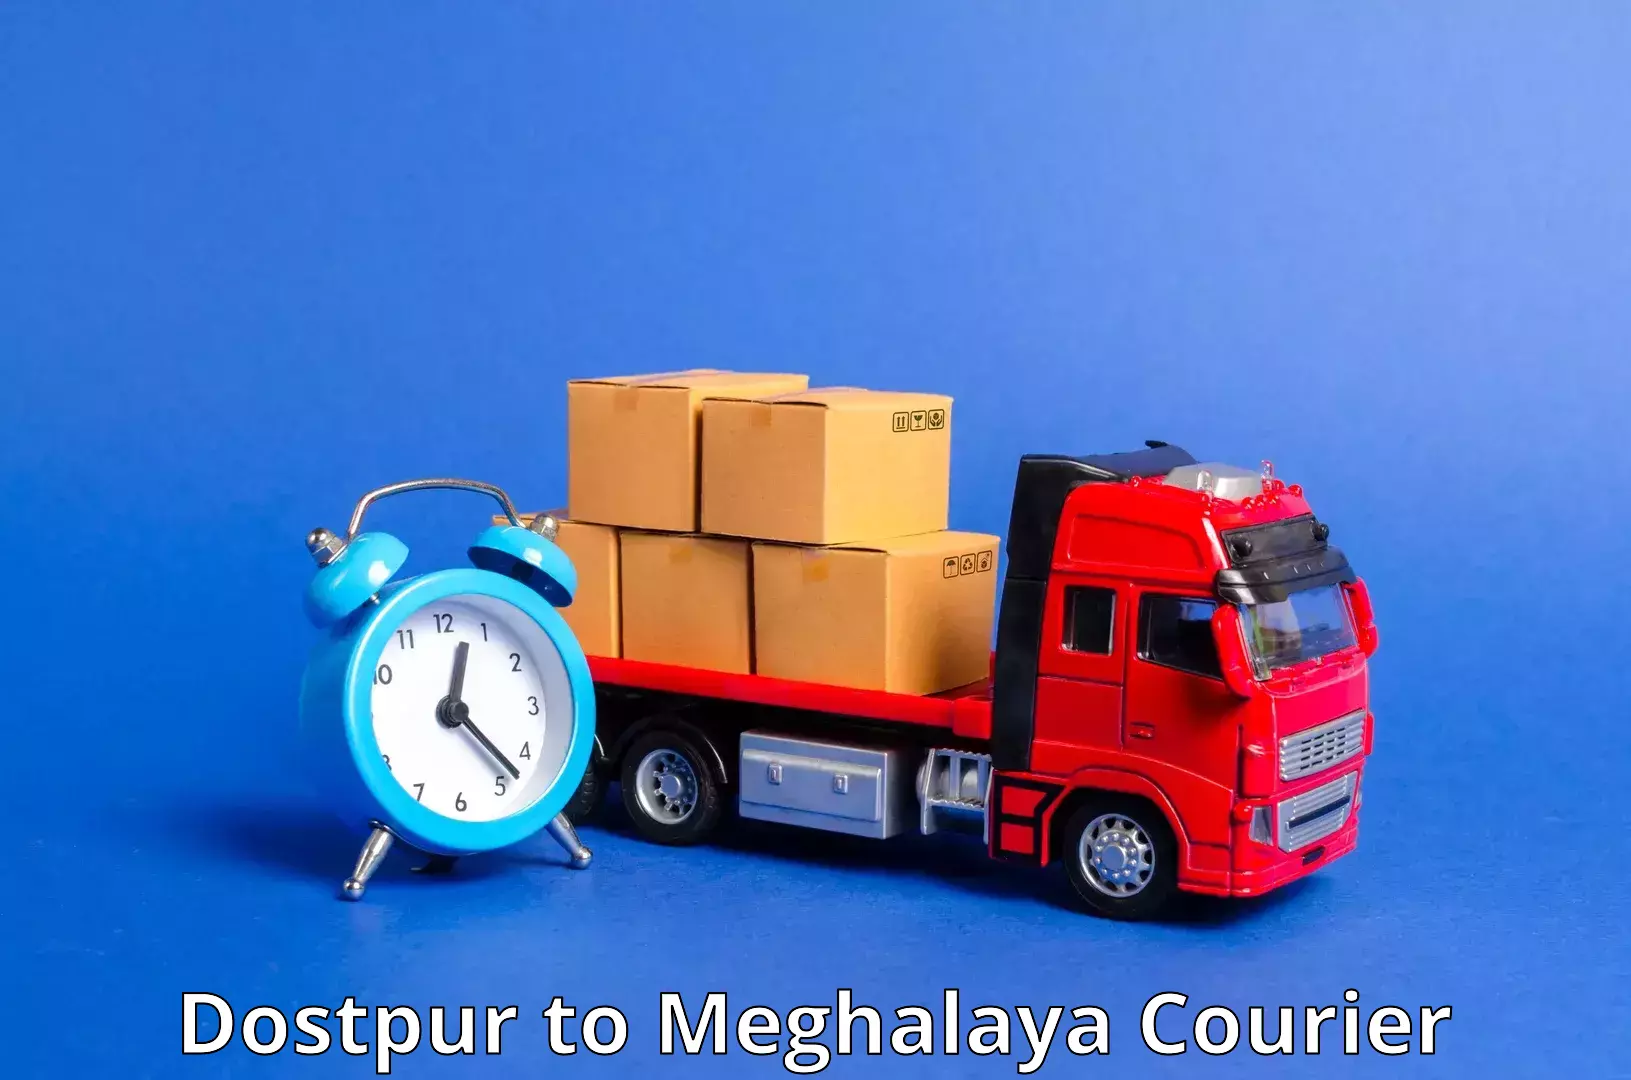 Multi-national courier services Dostpur to Umsaw